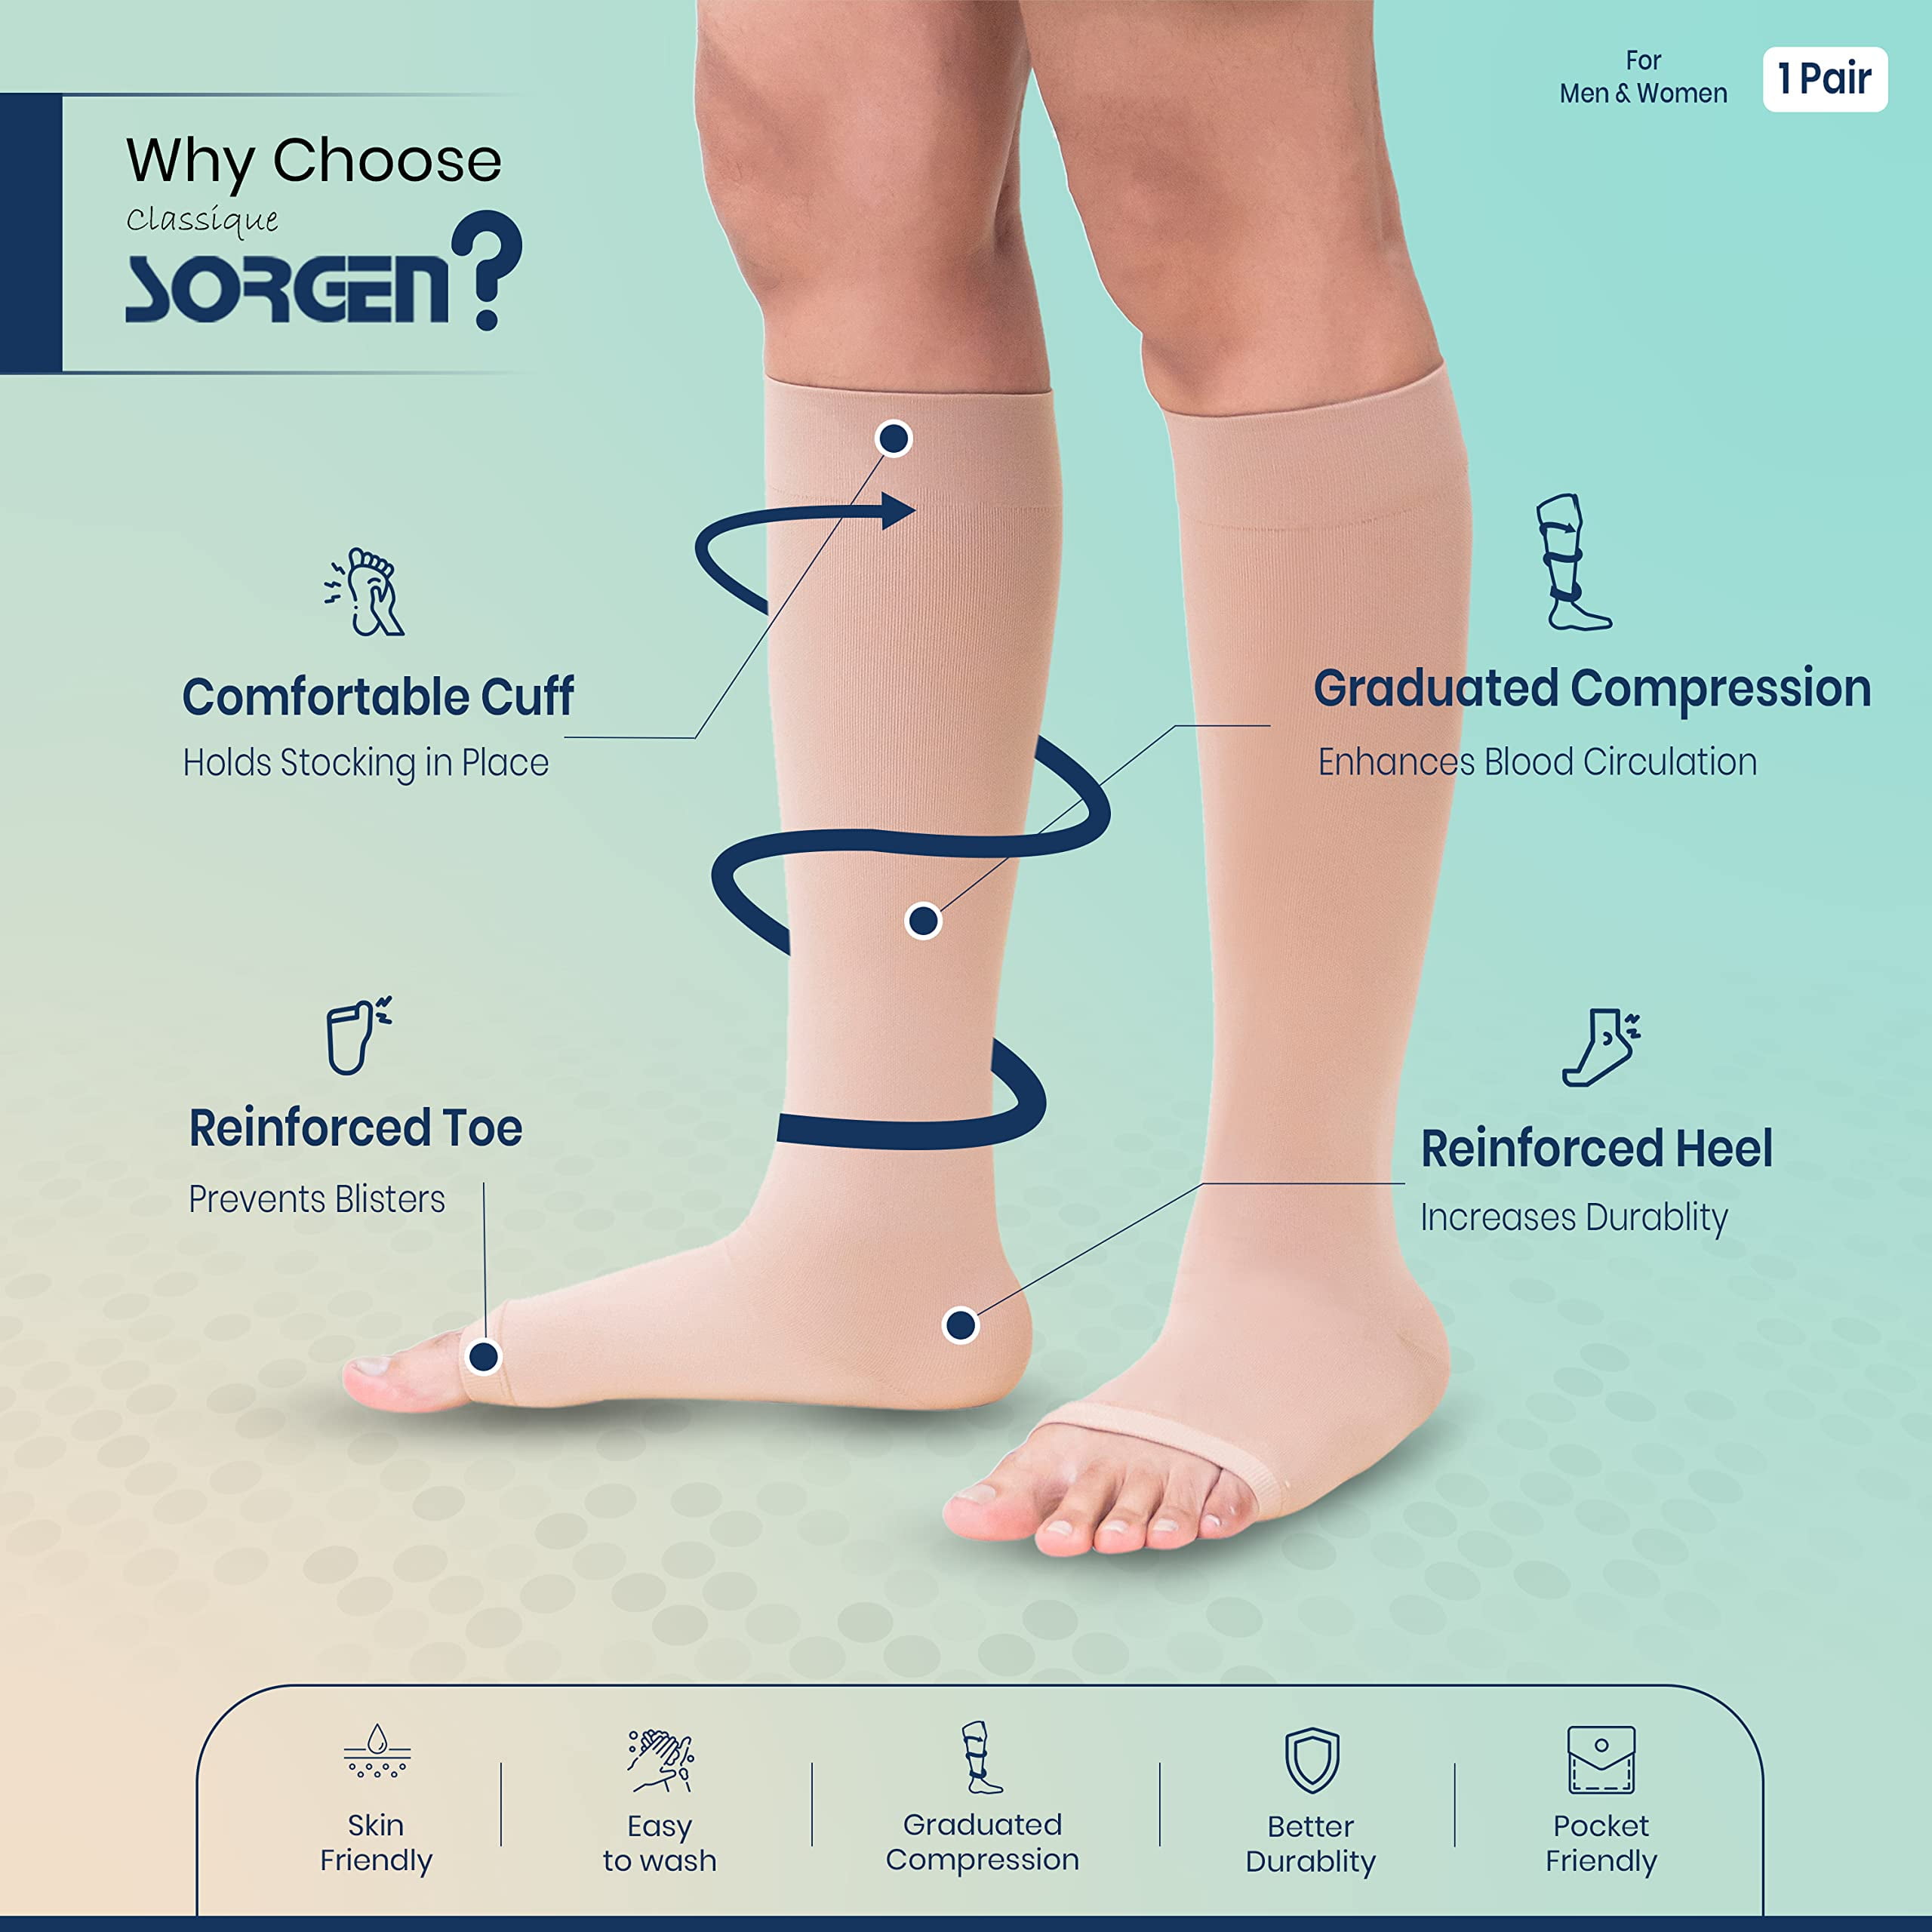 Sorgen Classique (Lycra) Medical Compression Stockings for Varicose Veins  Class 2 Knee Length in Eco-Friendly Zip Pouch. (XXL) 